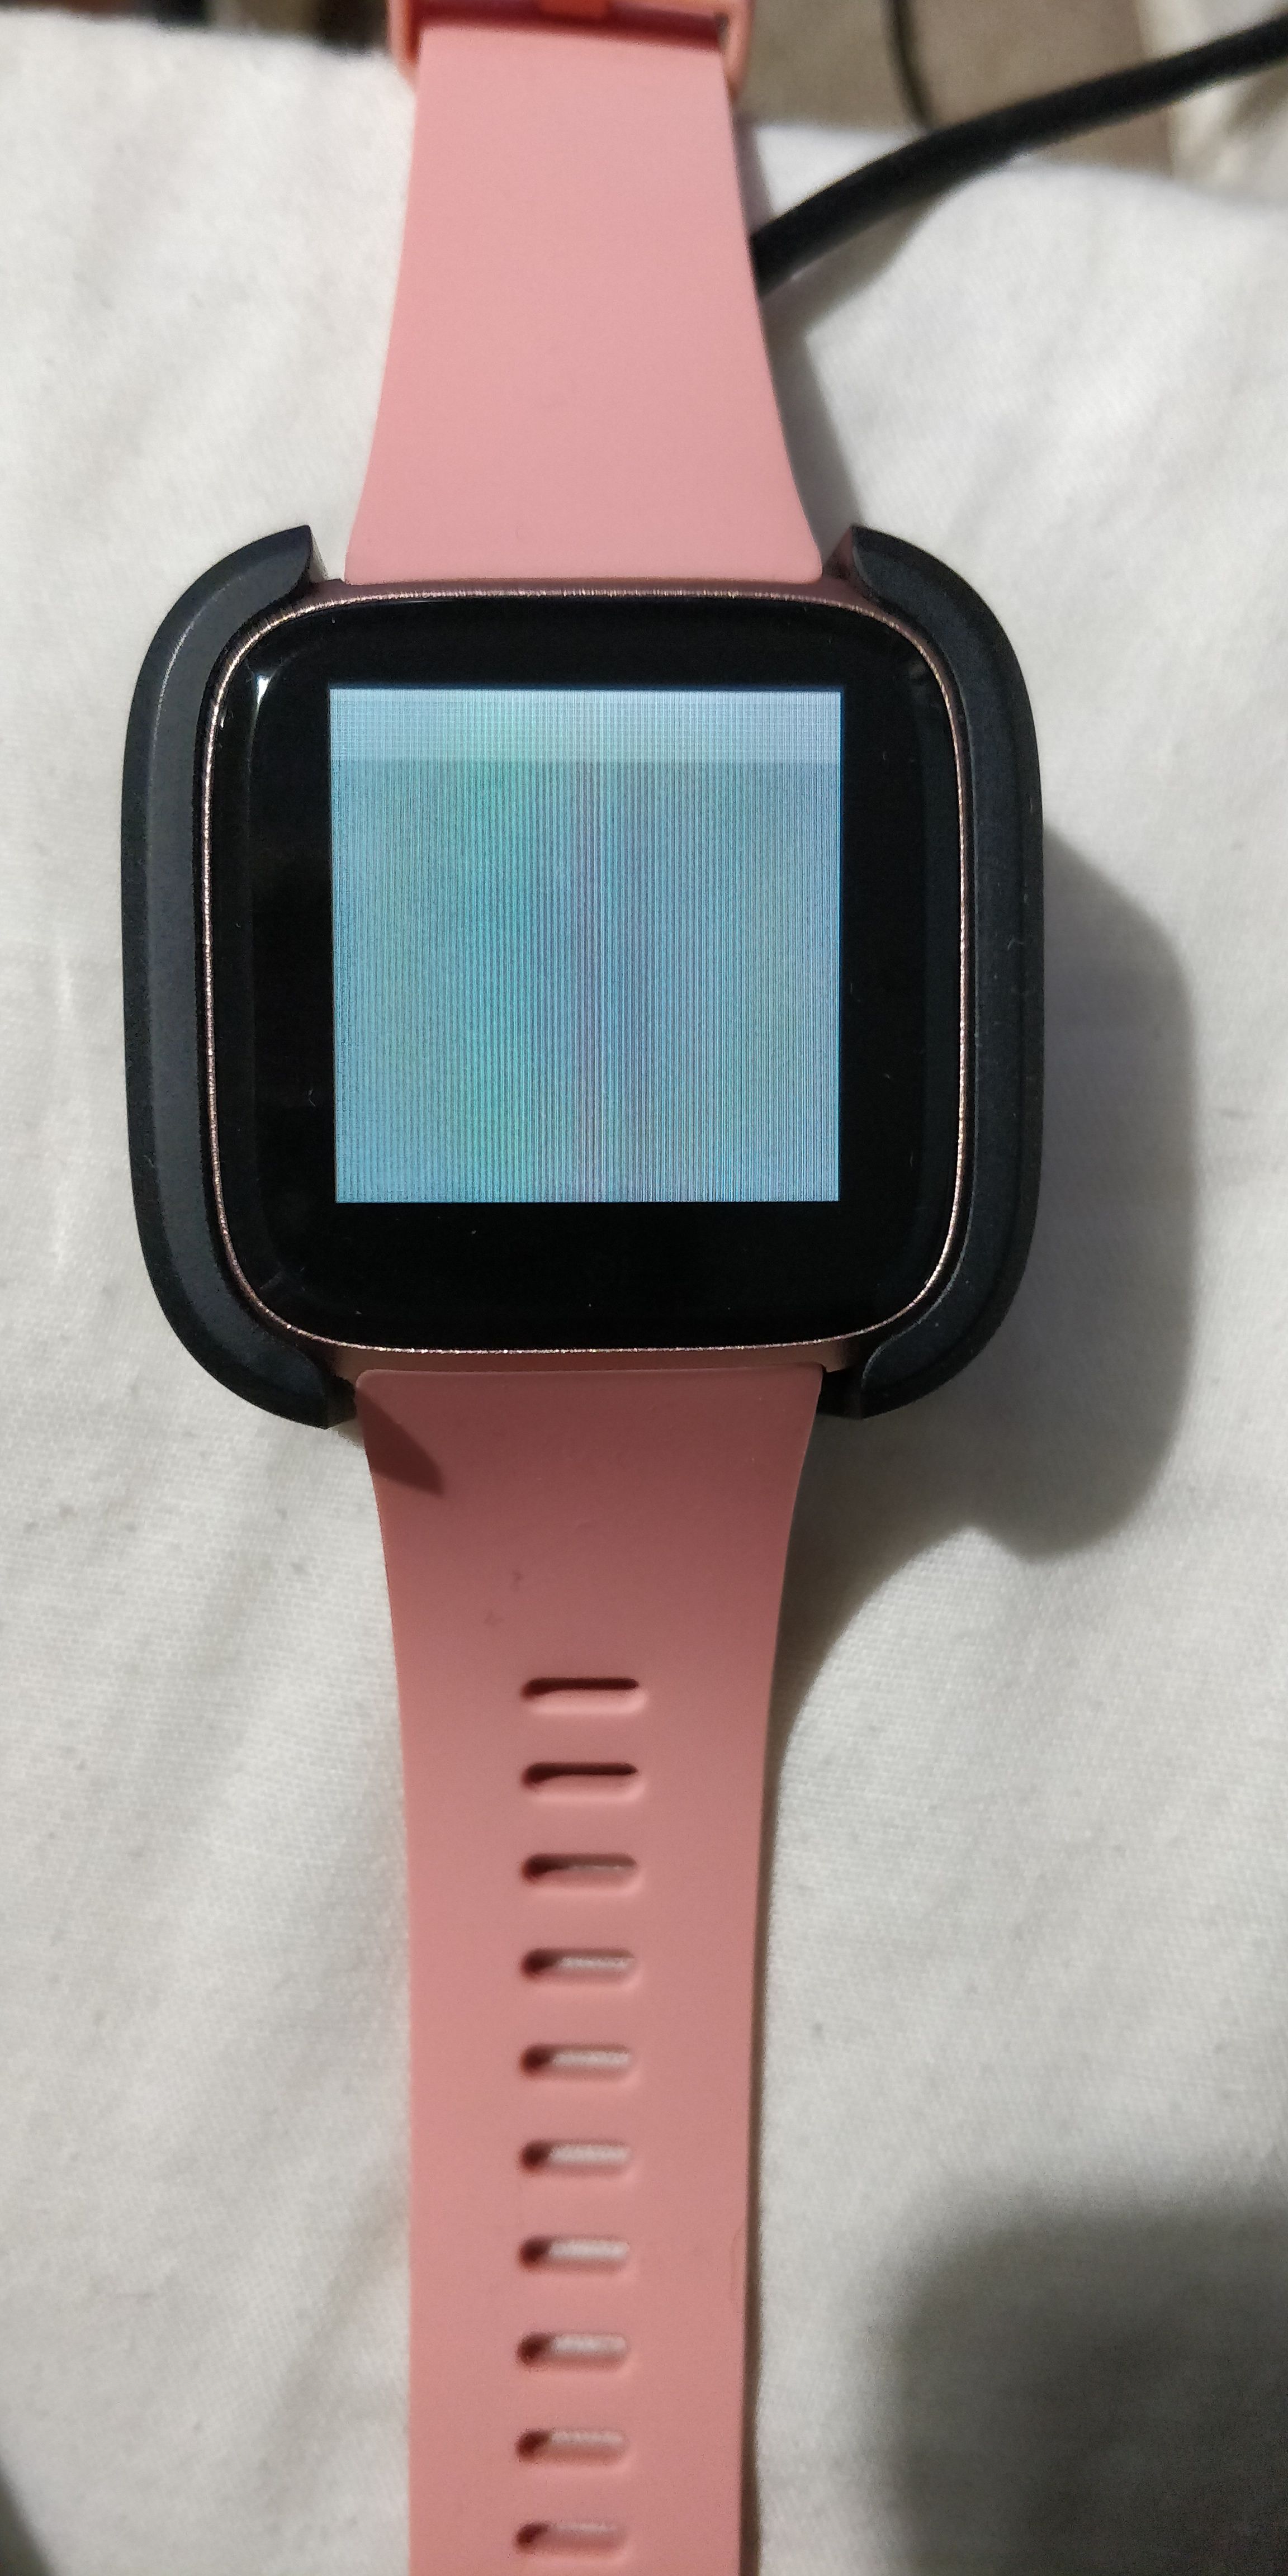 Solved: Fitbit Versa Screen Issue 